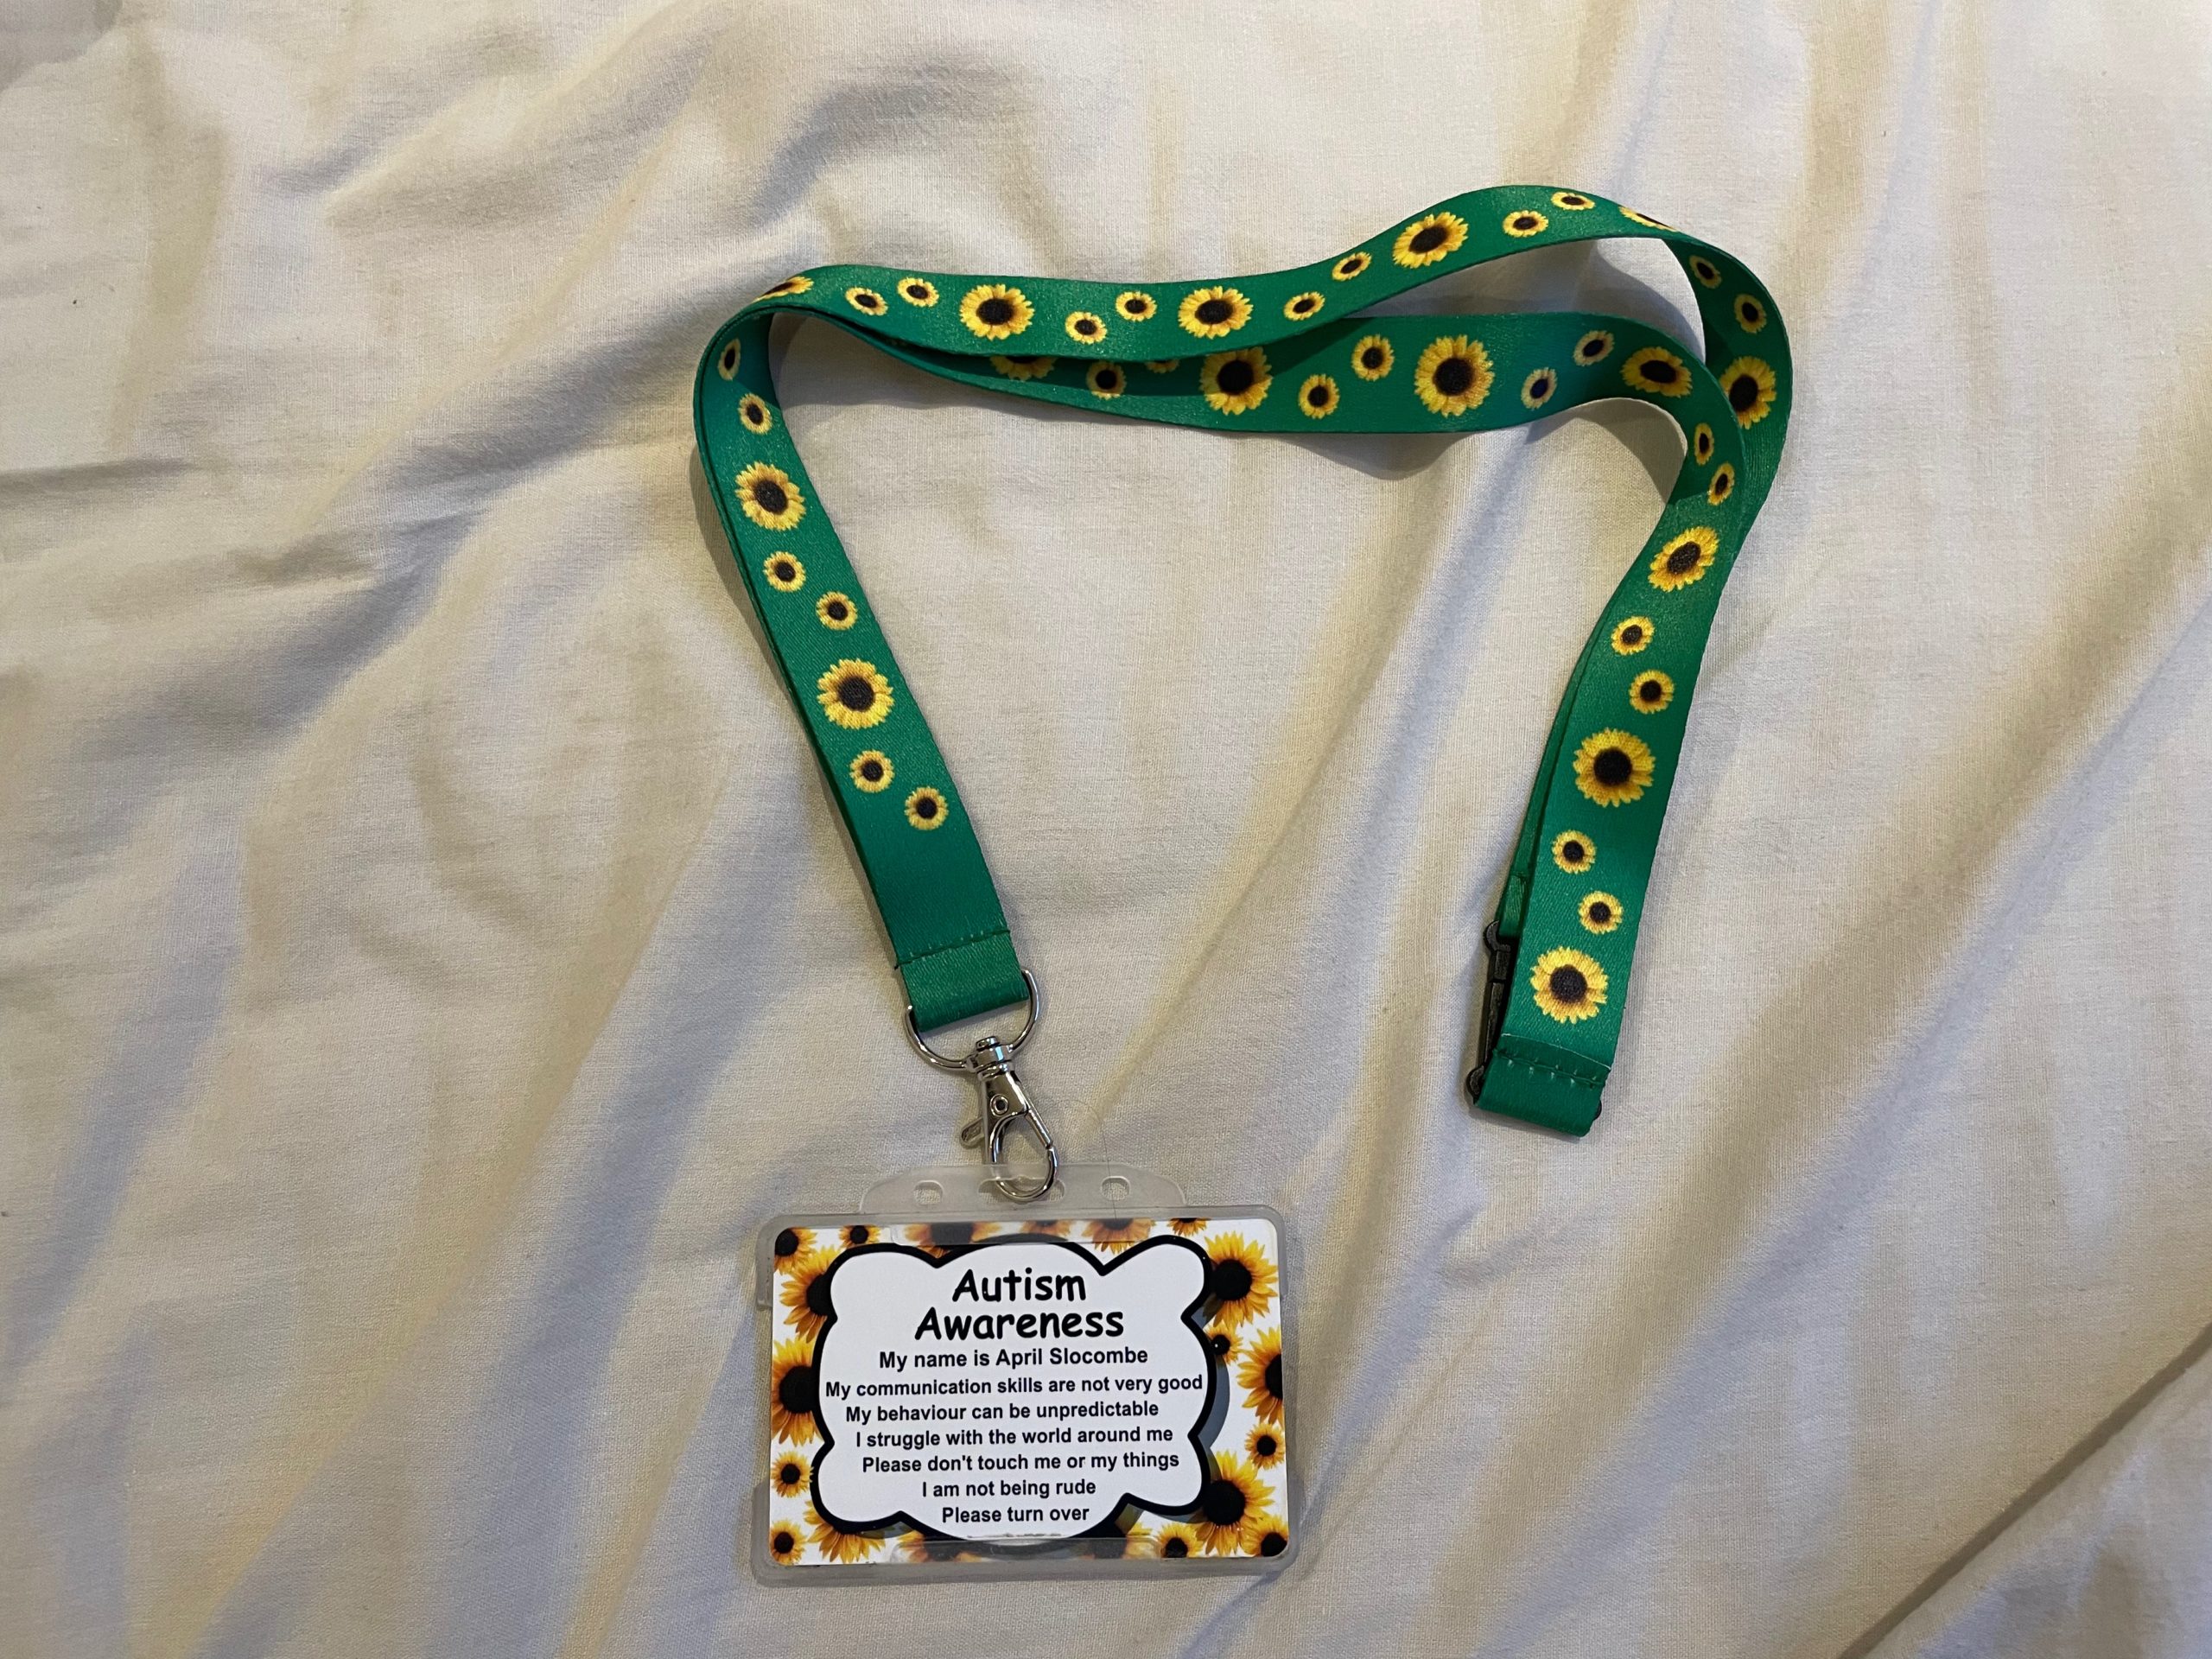 An autism awareness card with a sunflower border is attached to a green lanyard with sunflowers on it. The card and the lanyard are lying on a light grey bedsheet.